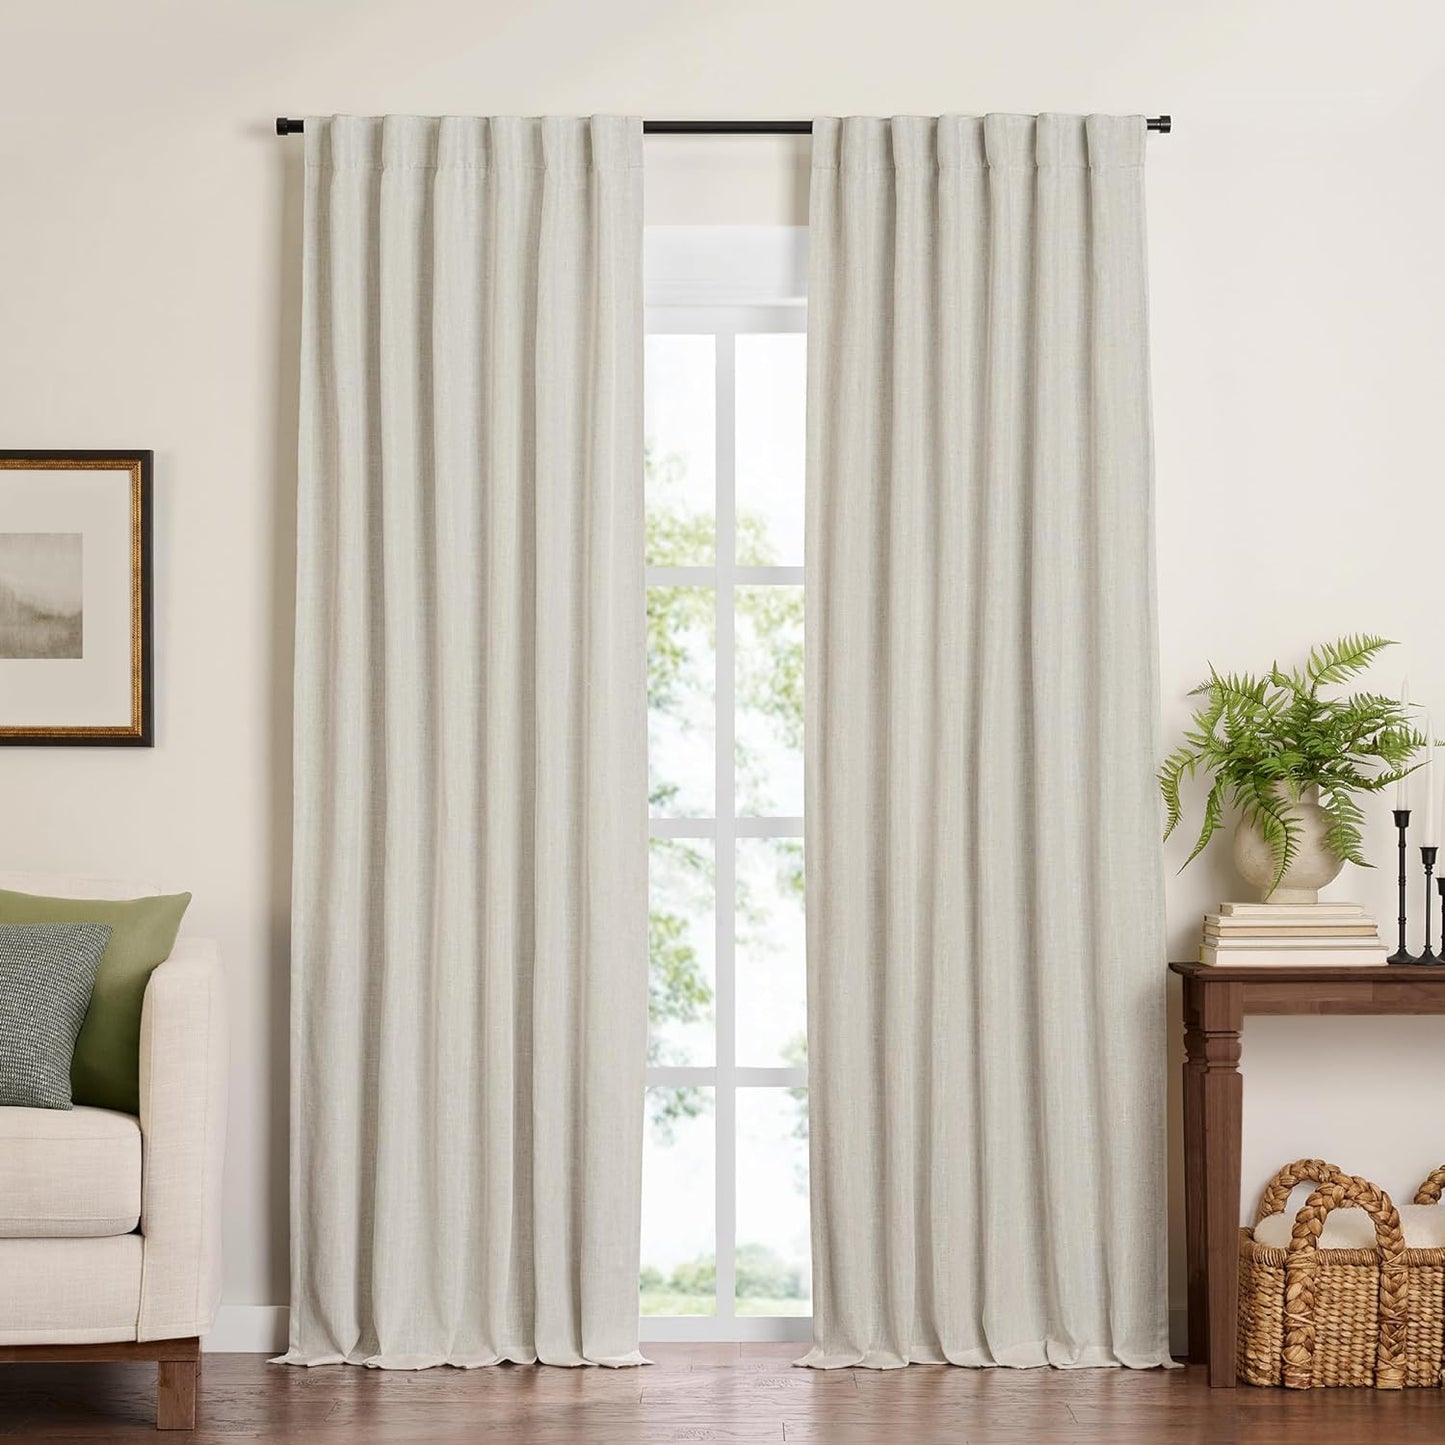 Elrene Home Fashions Harrow Solid Texture Blackout Single Window Curtain Panel, 52"X84", Natural  Elrene Home Fashions Natural 52"X108" (1 Panel) 